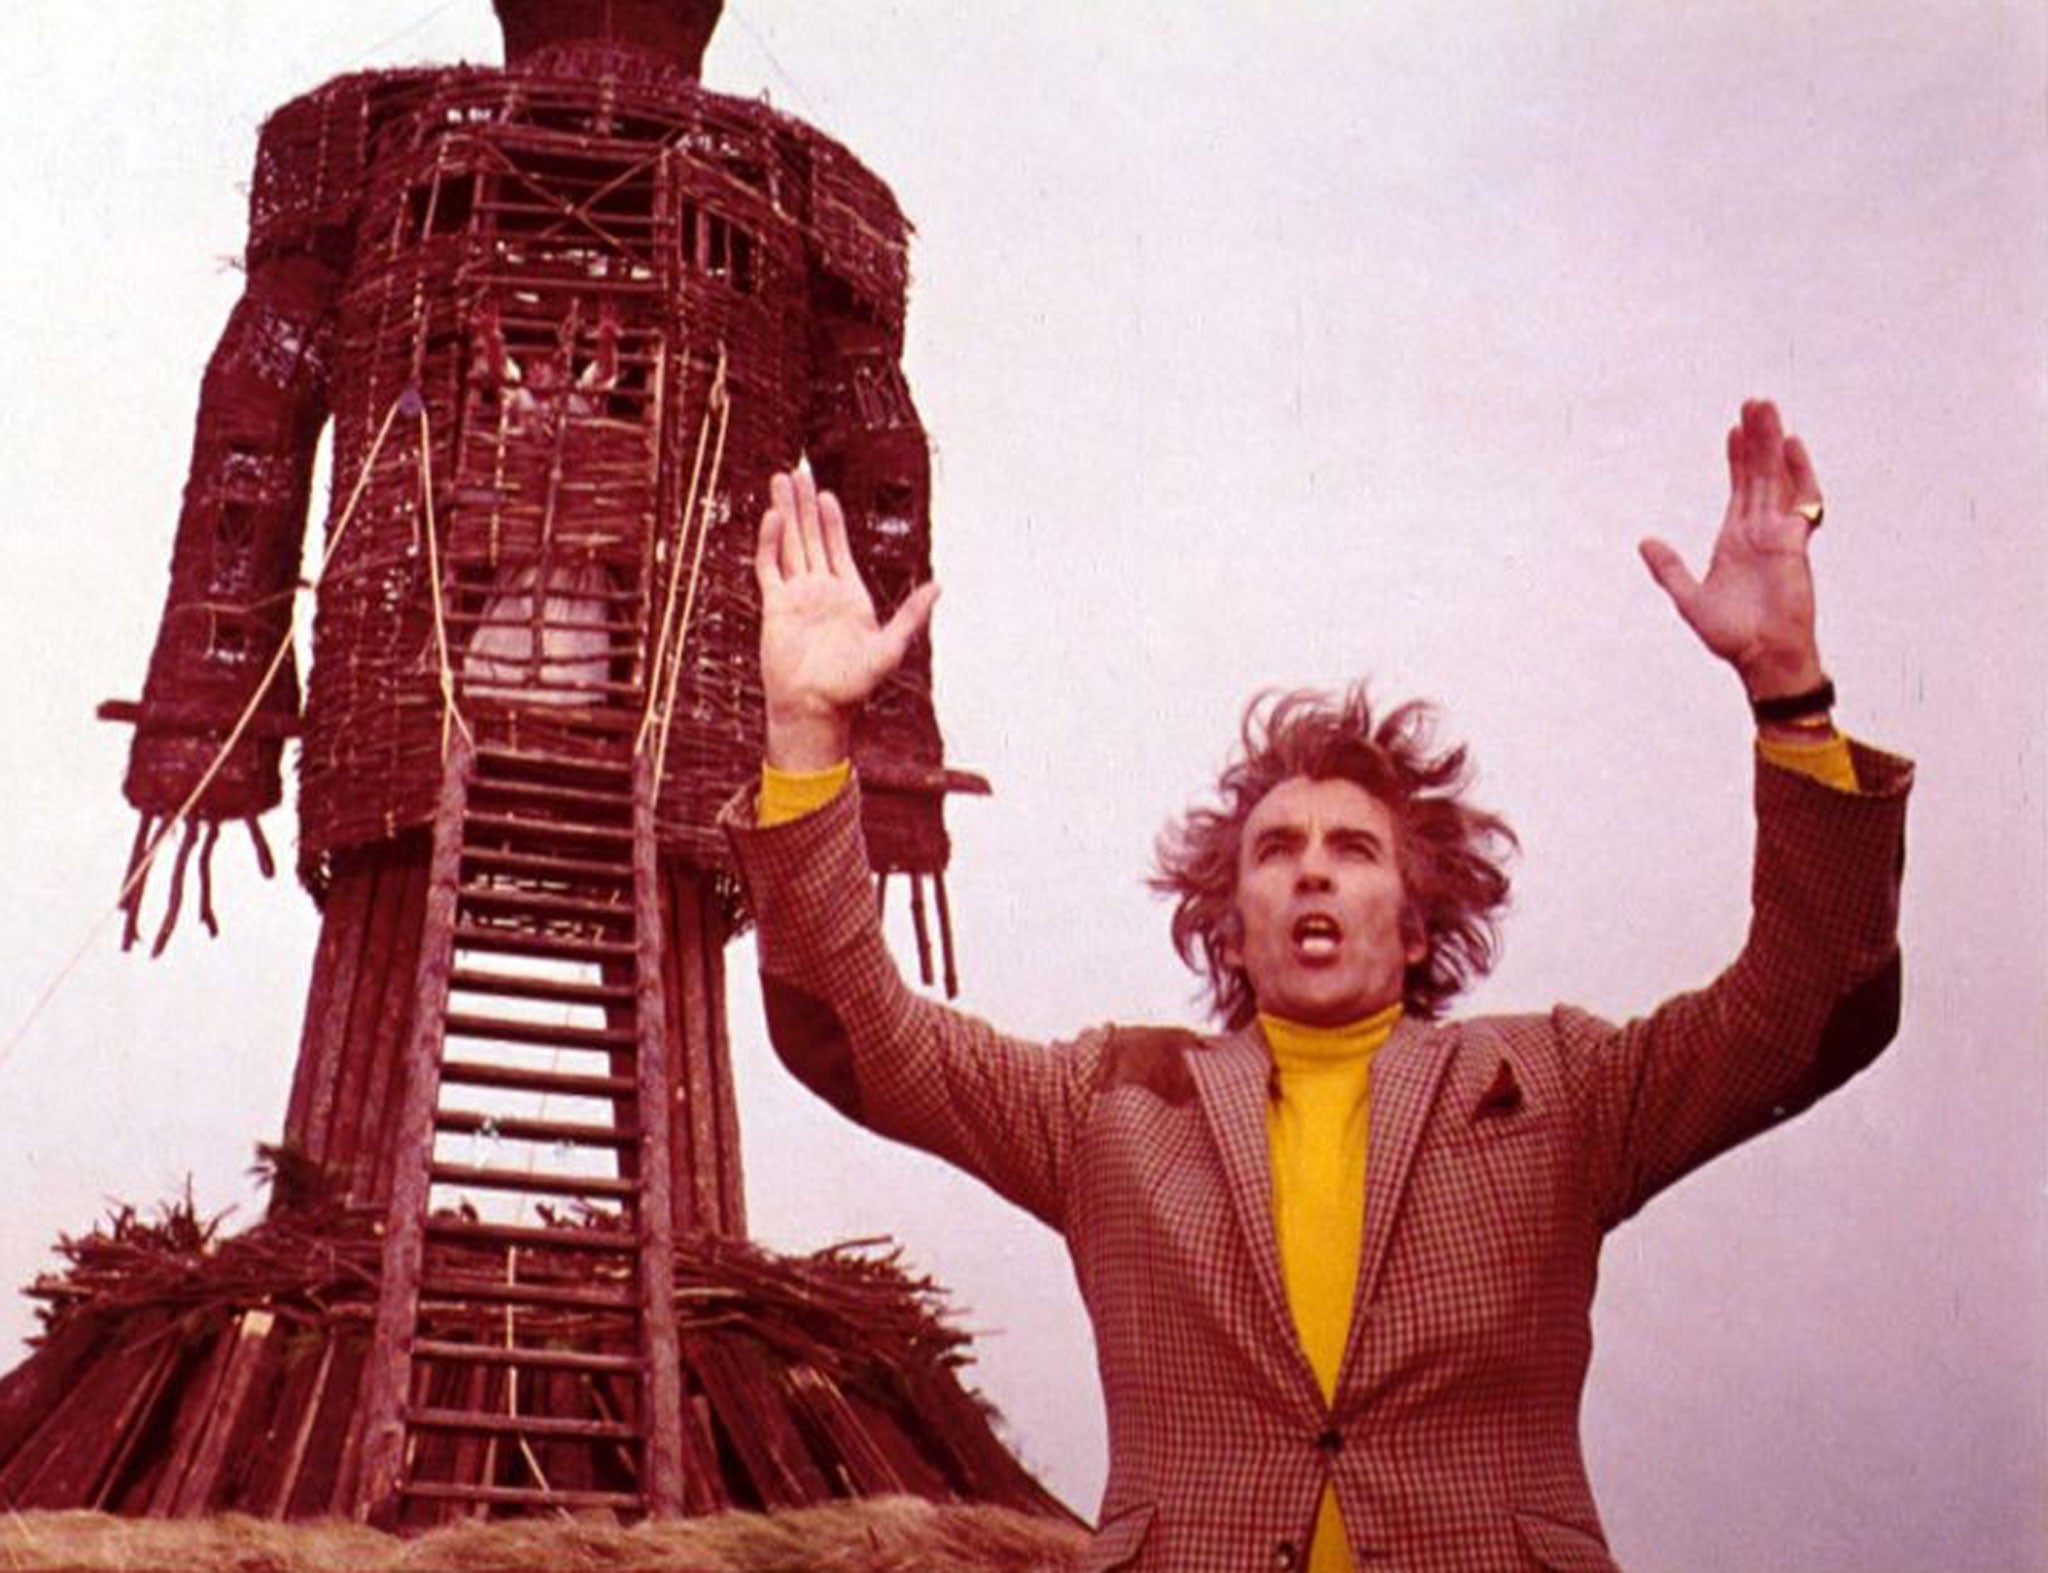 Yet another version of The Wicker Man is on release